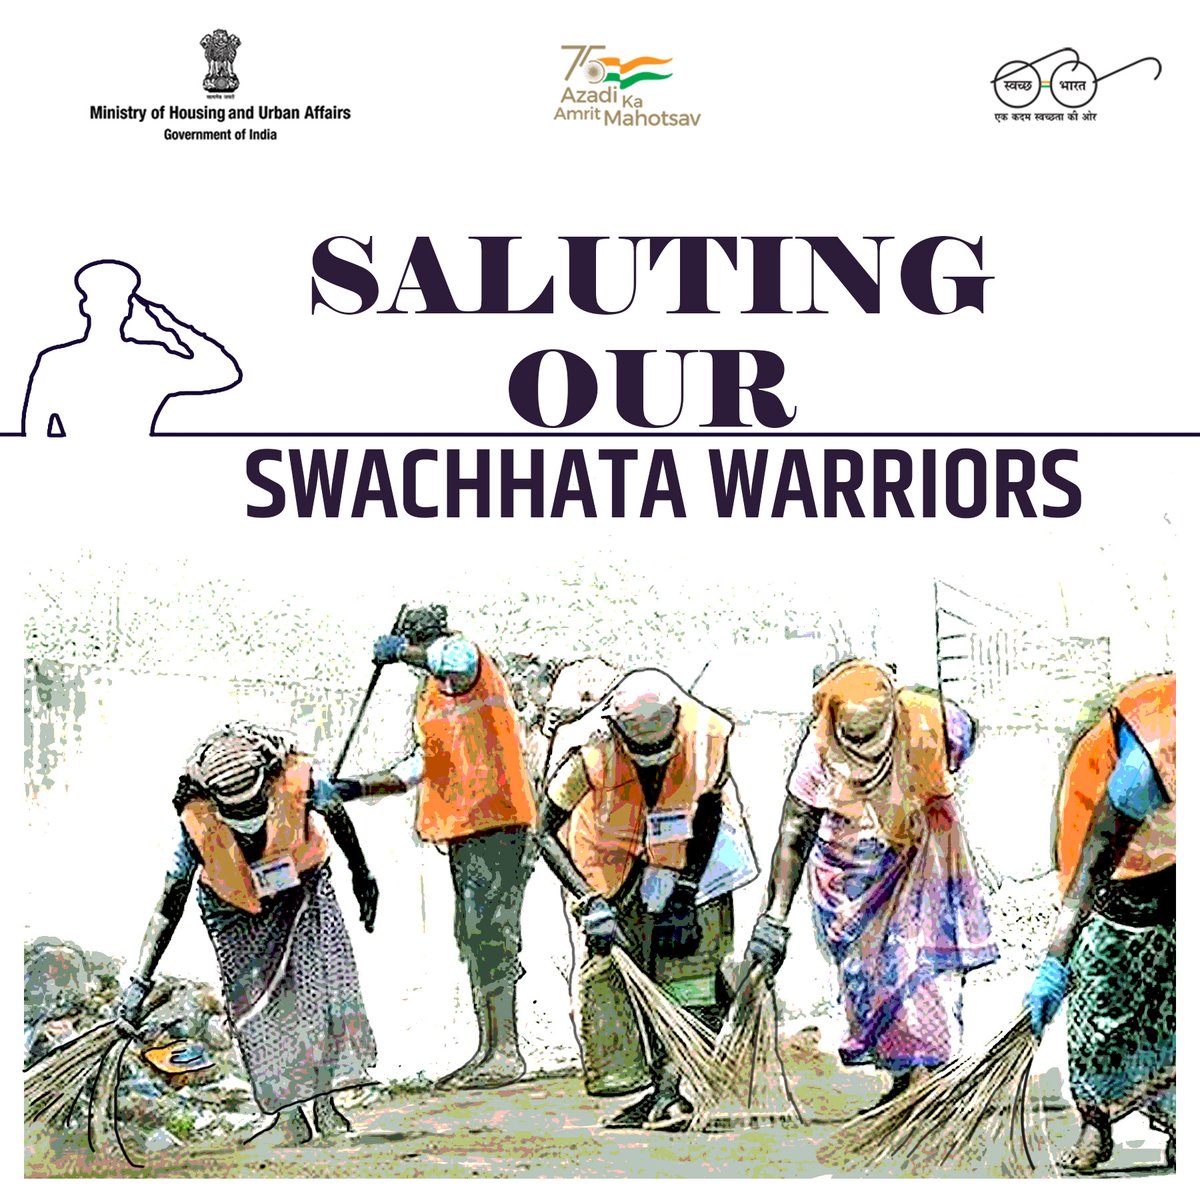 Under the scheme of #SwachhBharatMission-Urban 2.O, Our #SwachhataWarriors ensure, we walk on the clean streets. We appreciate and express our #gratitude towards our Swachhata Warriors for their relentless efforts in making our country, #India a visual bliss.